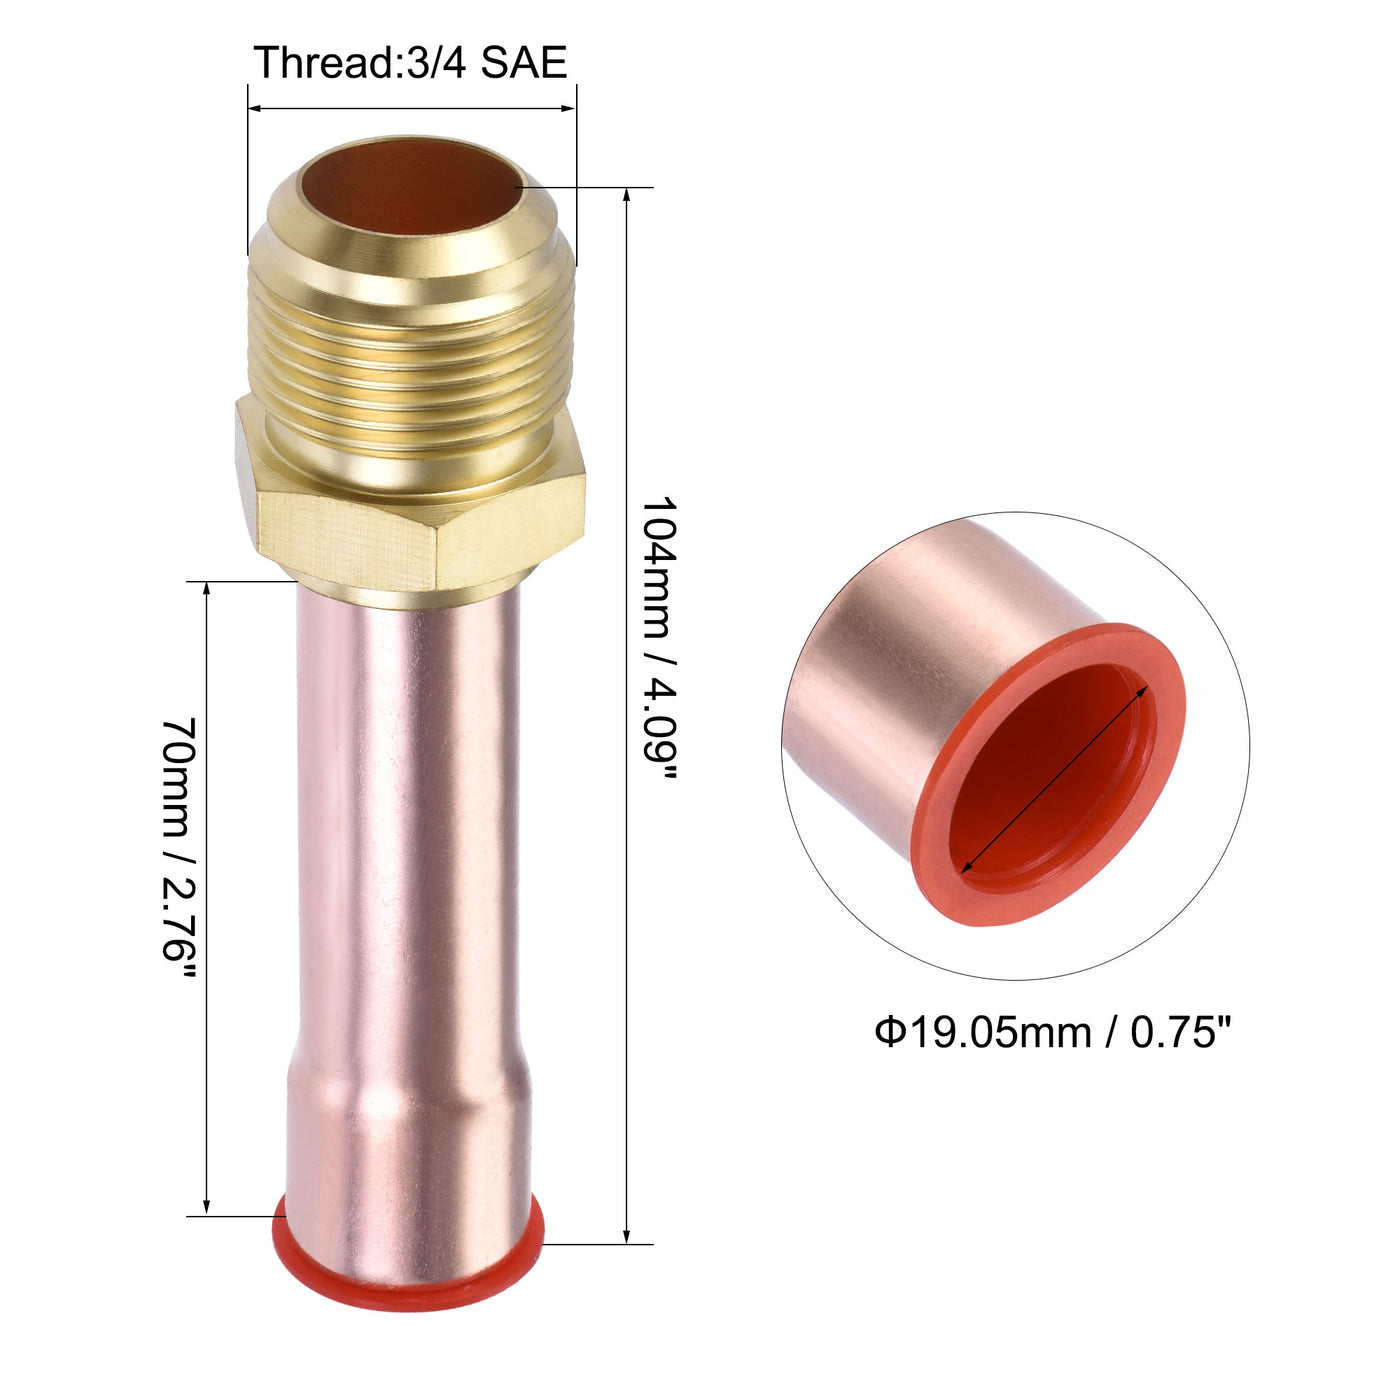 Uxcell Uxcell Brass Pipe Fitting, 1/2 SAE Flare Connector Male Thread Adapter with Copper Tube for Air Conditioner HVAC System